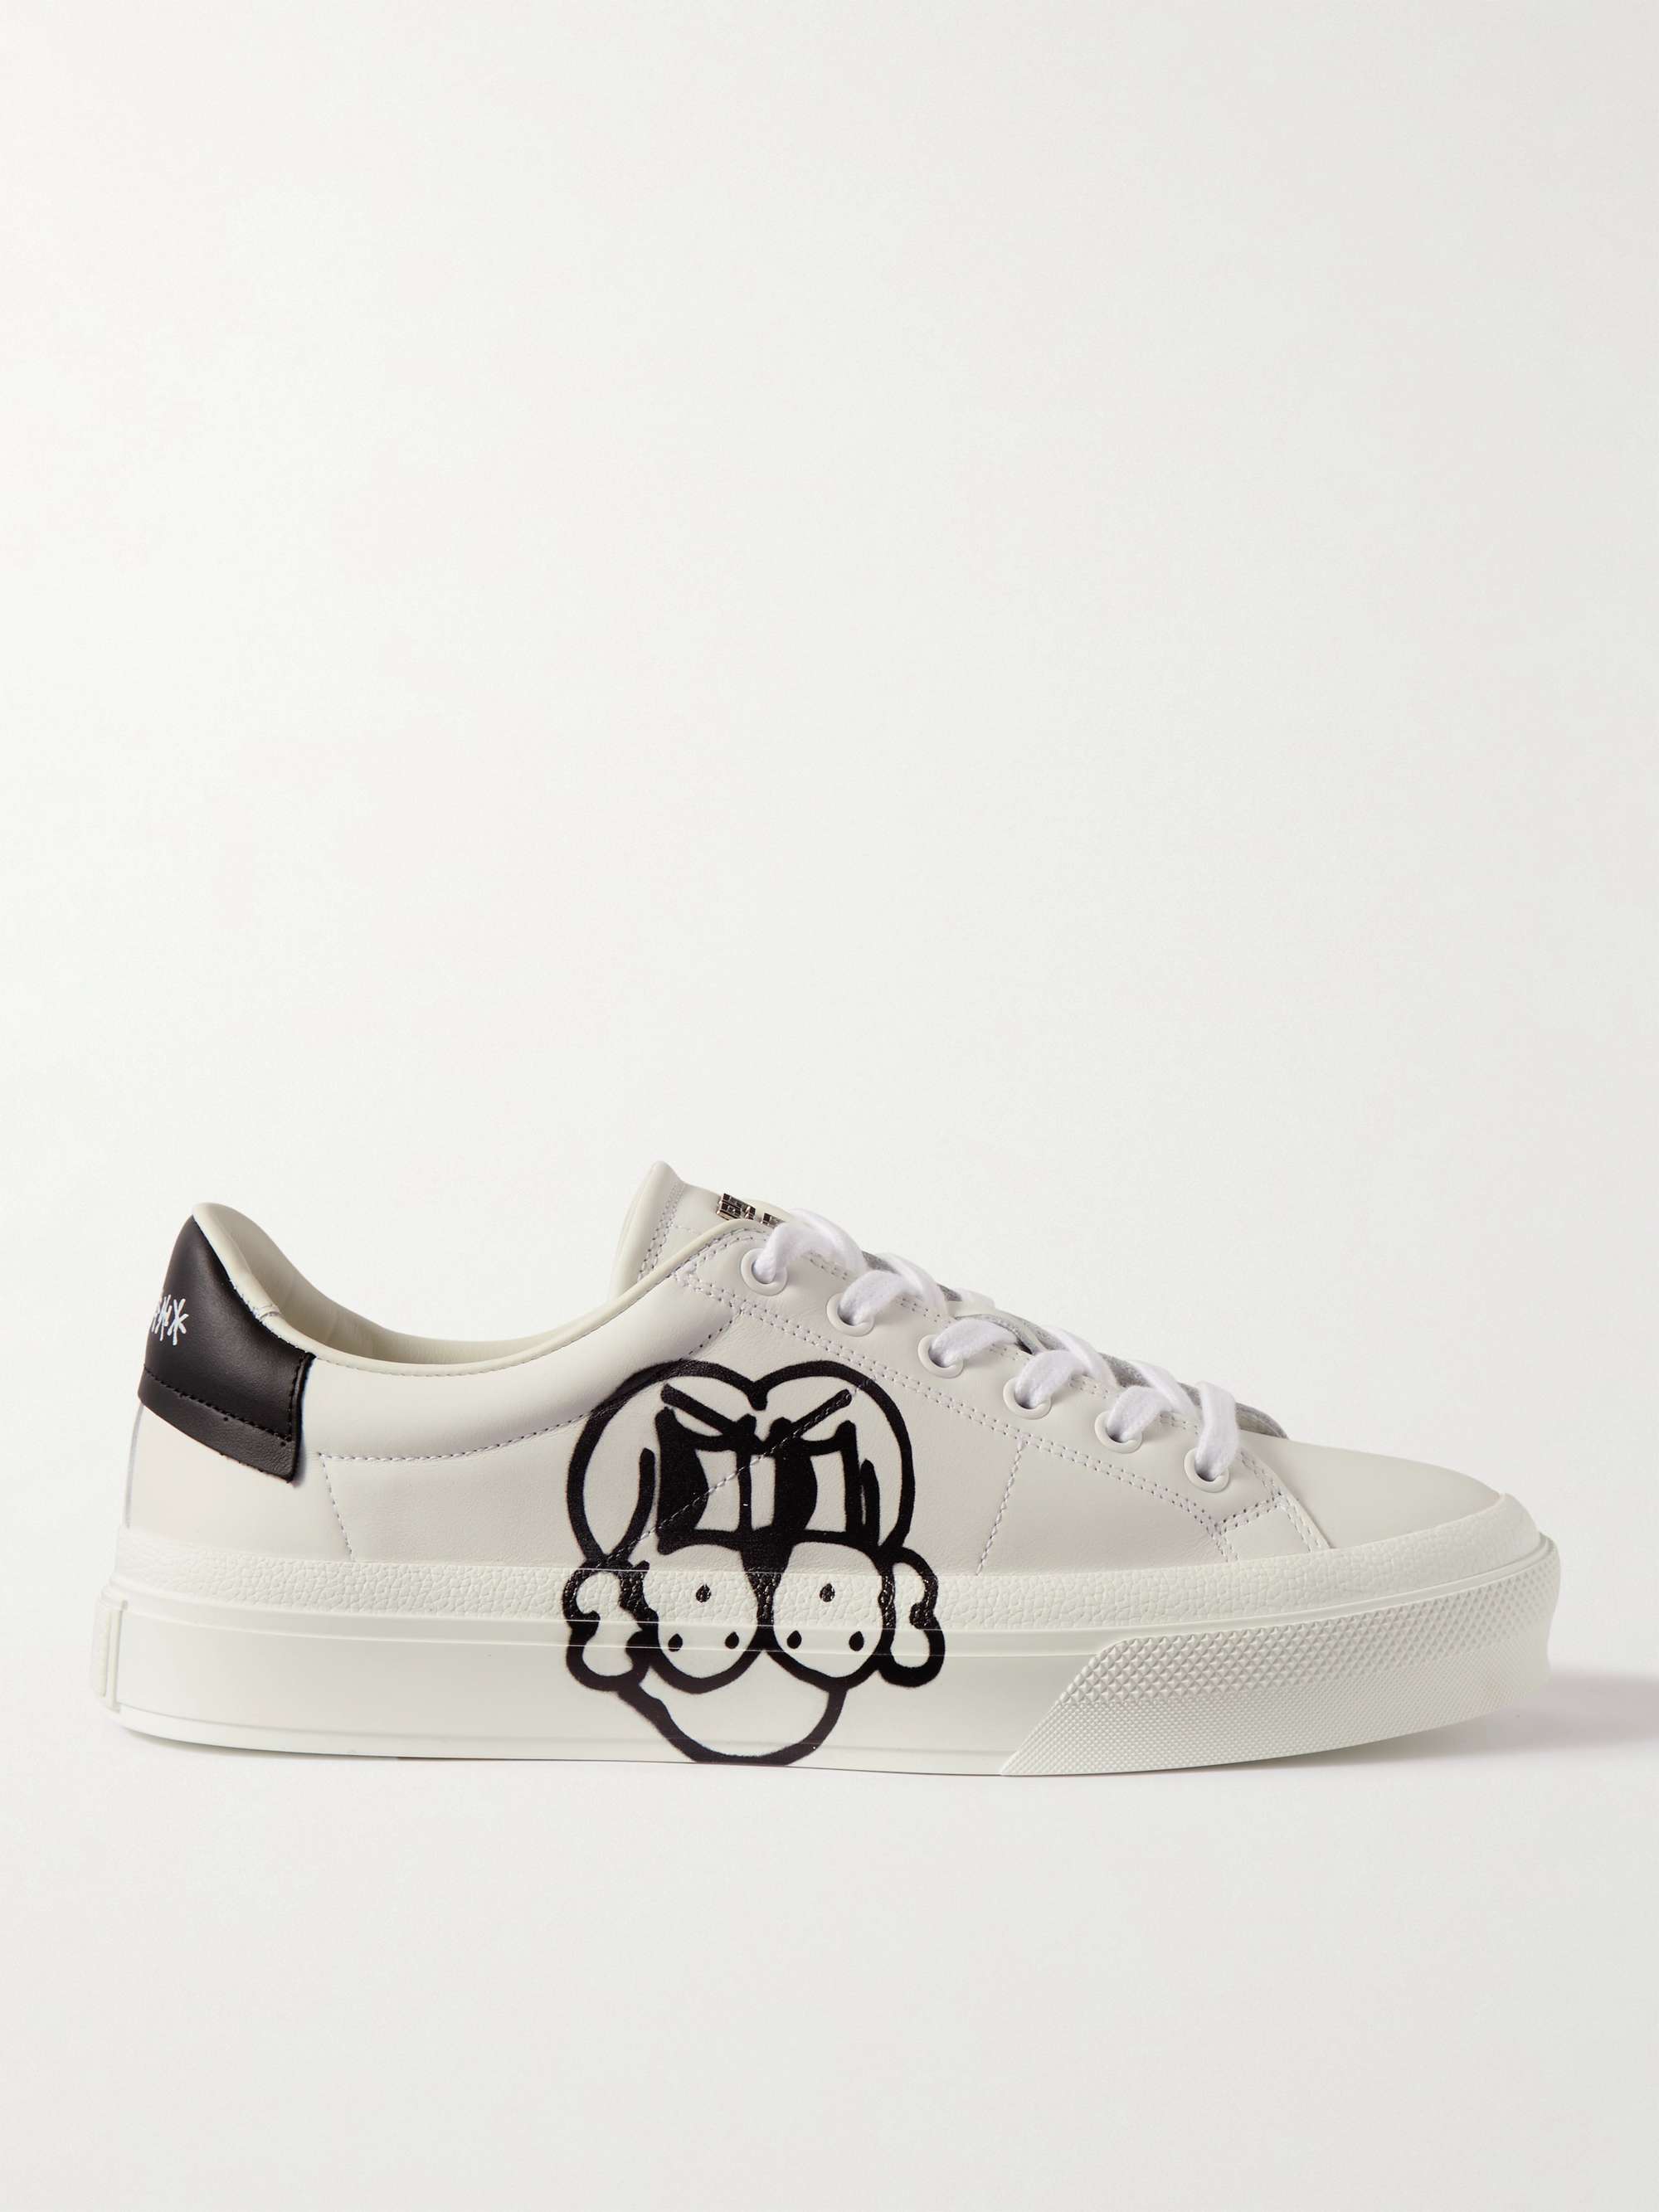 + Chito City Sport Printed Leather Sneakers